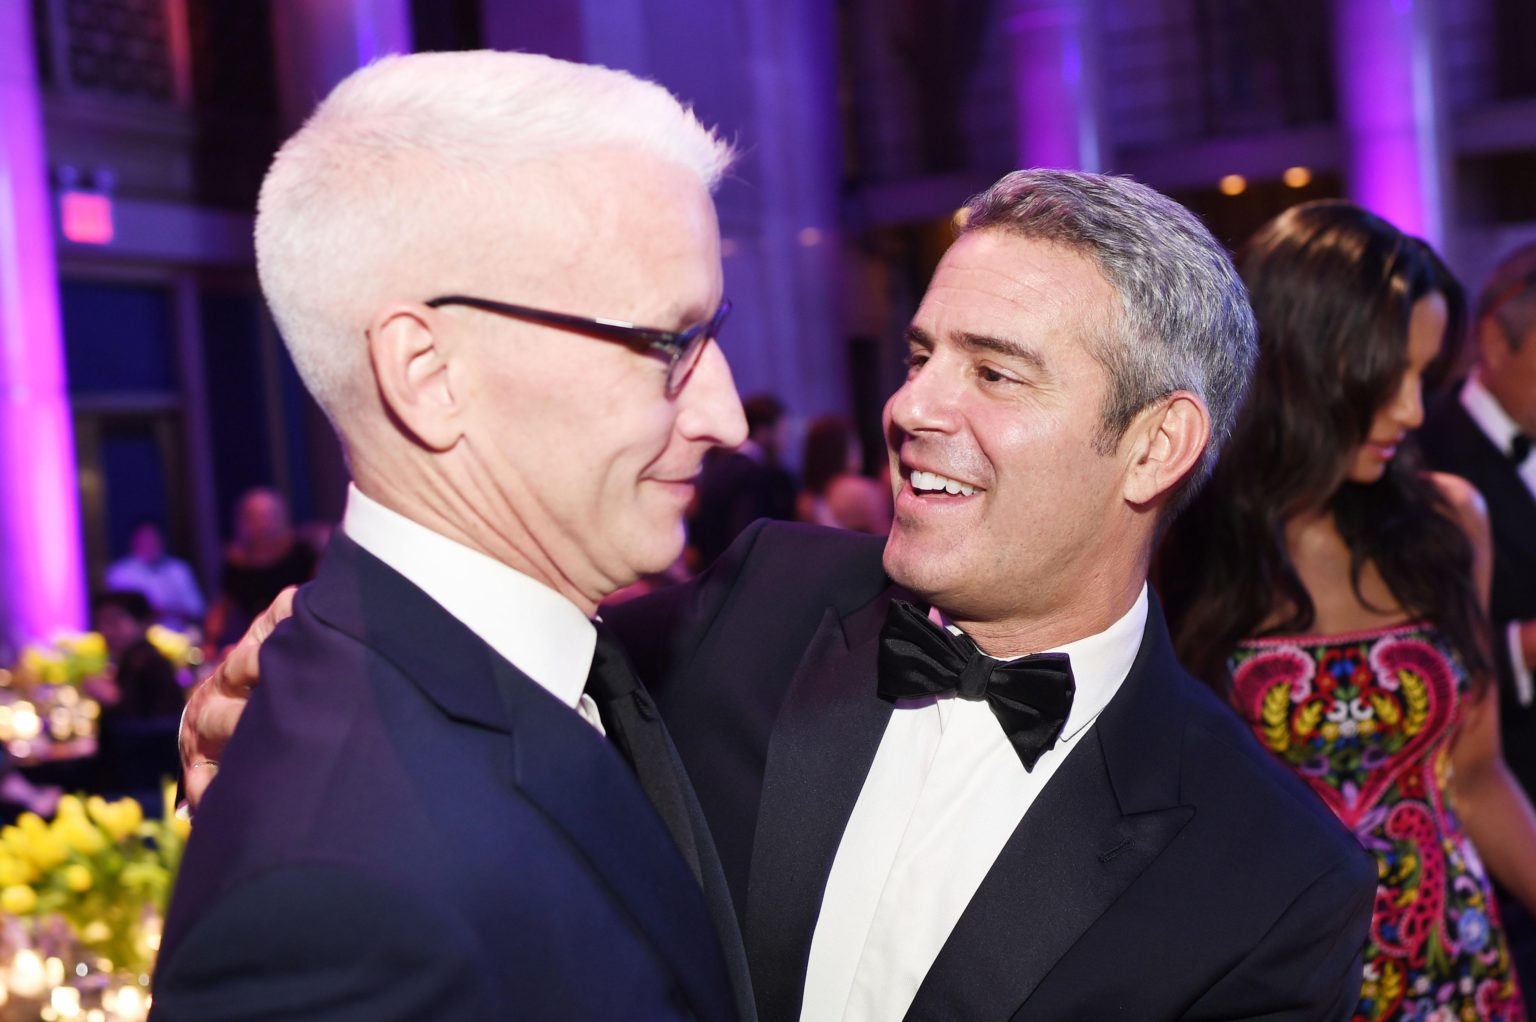 who-is-anderson-cooper-dating-friends-are-hoping-it-to-be-old-friend